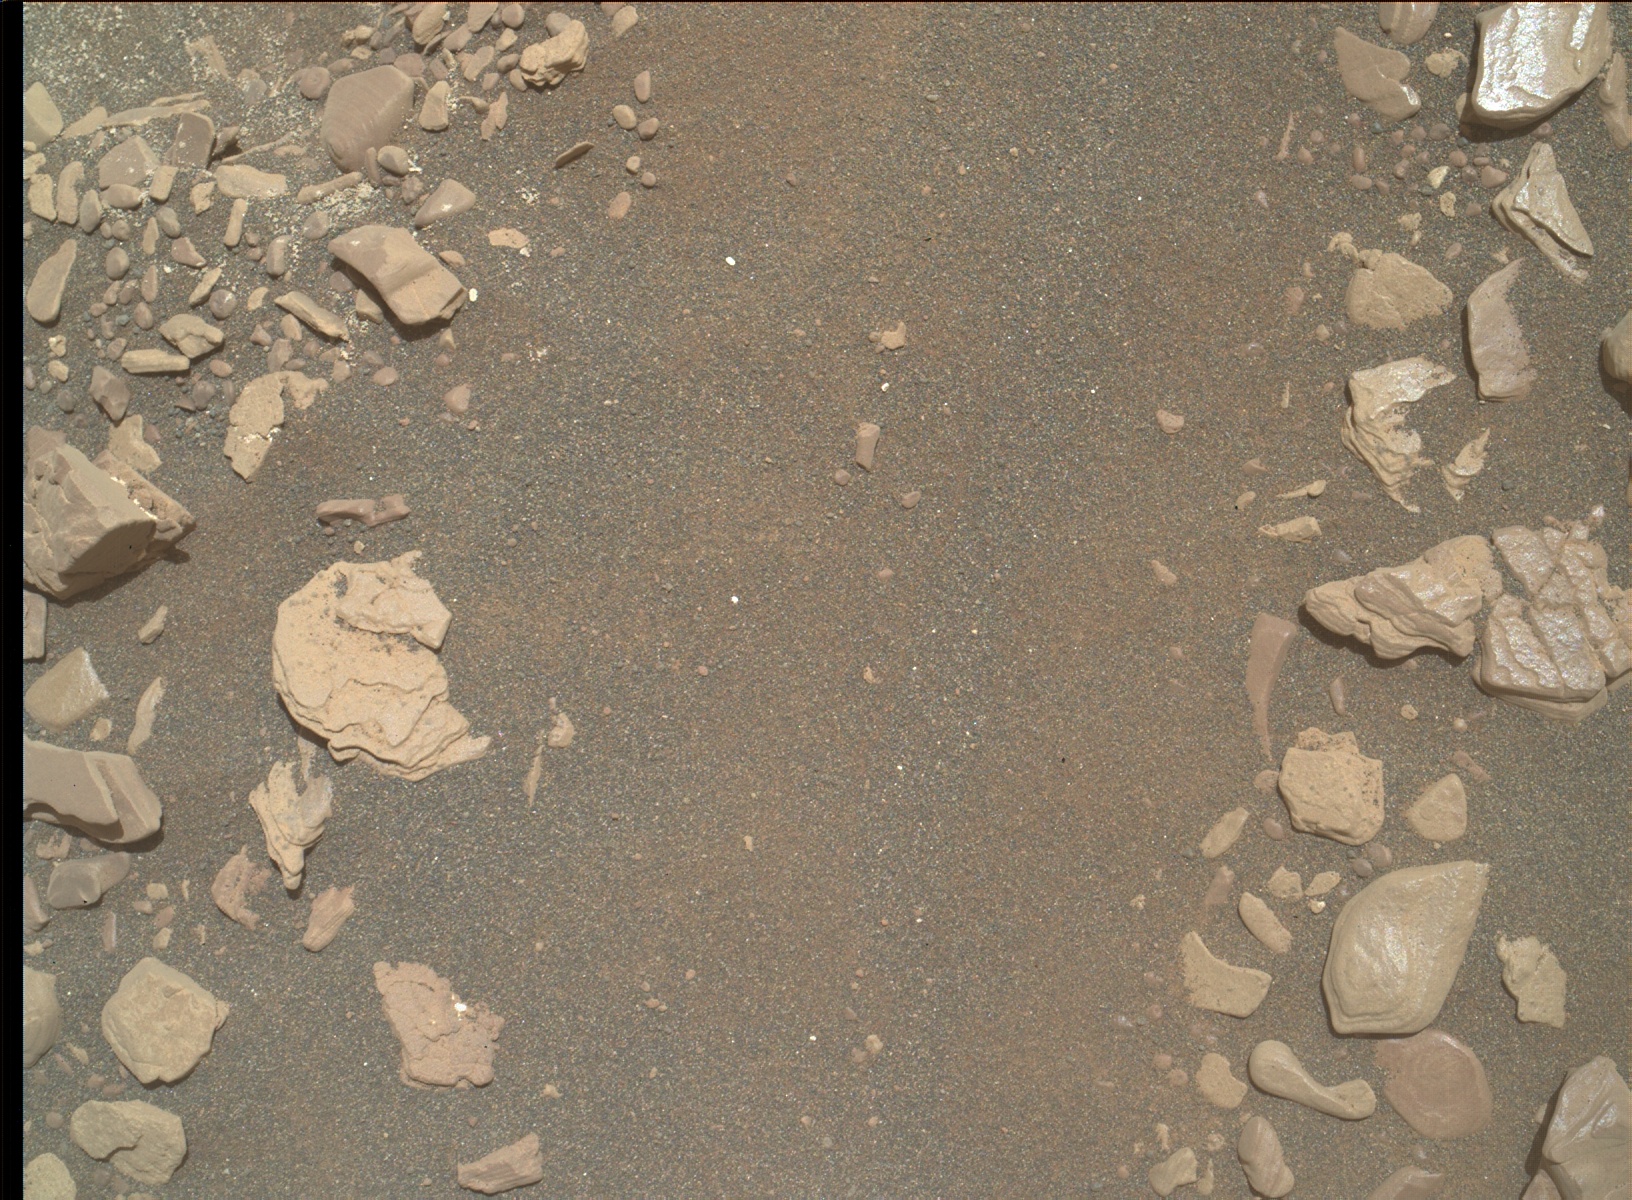 Nasa's Mars rover Curiosity acquired this image using its Mars Hand Lens Imager (MAHLI) on Sol 2920